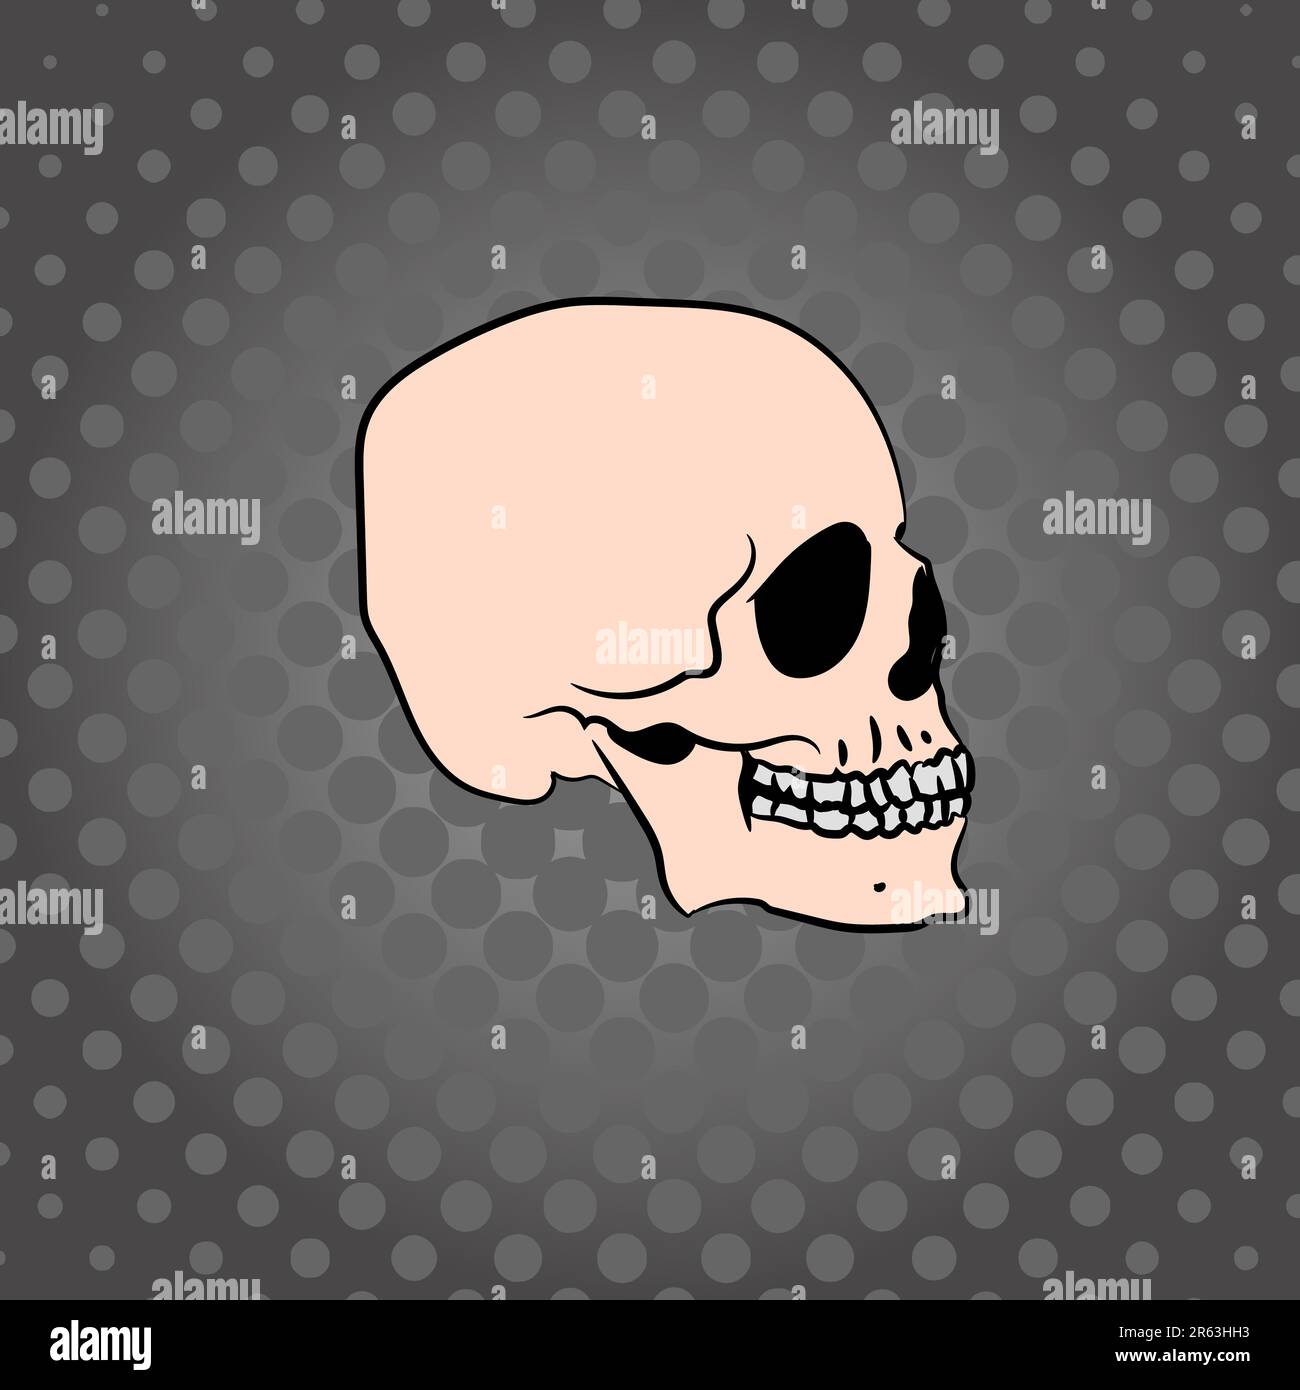 Hand drawn skull on a dark background with dots, vector illustration Stock Photo